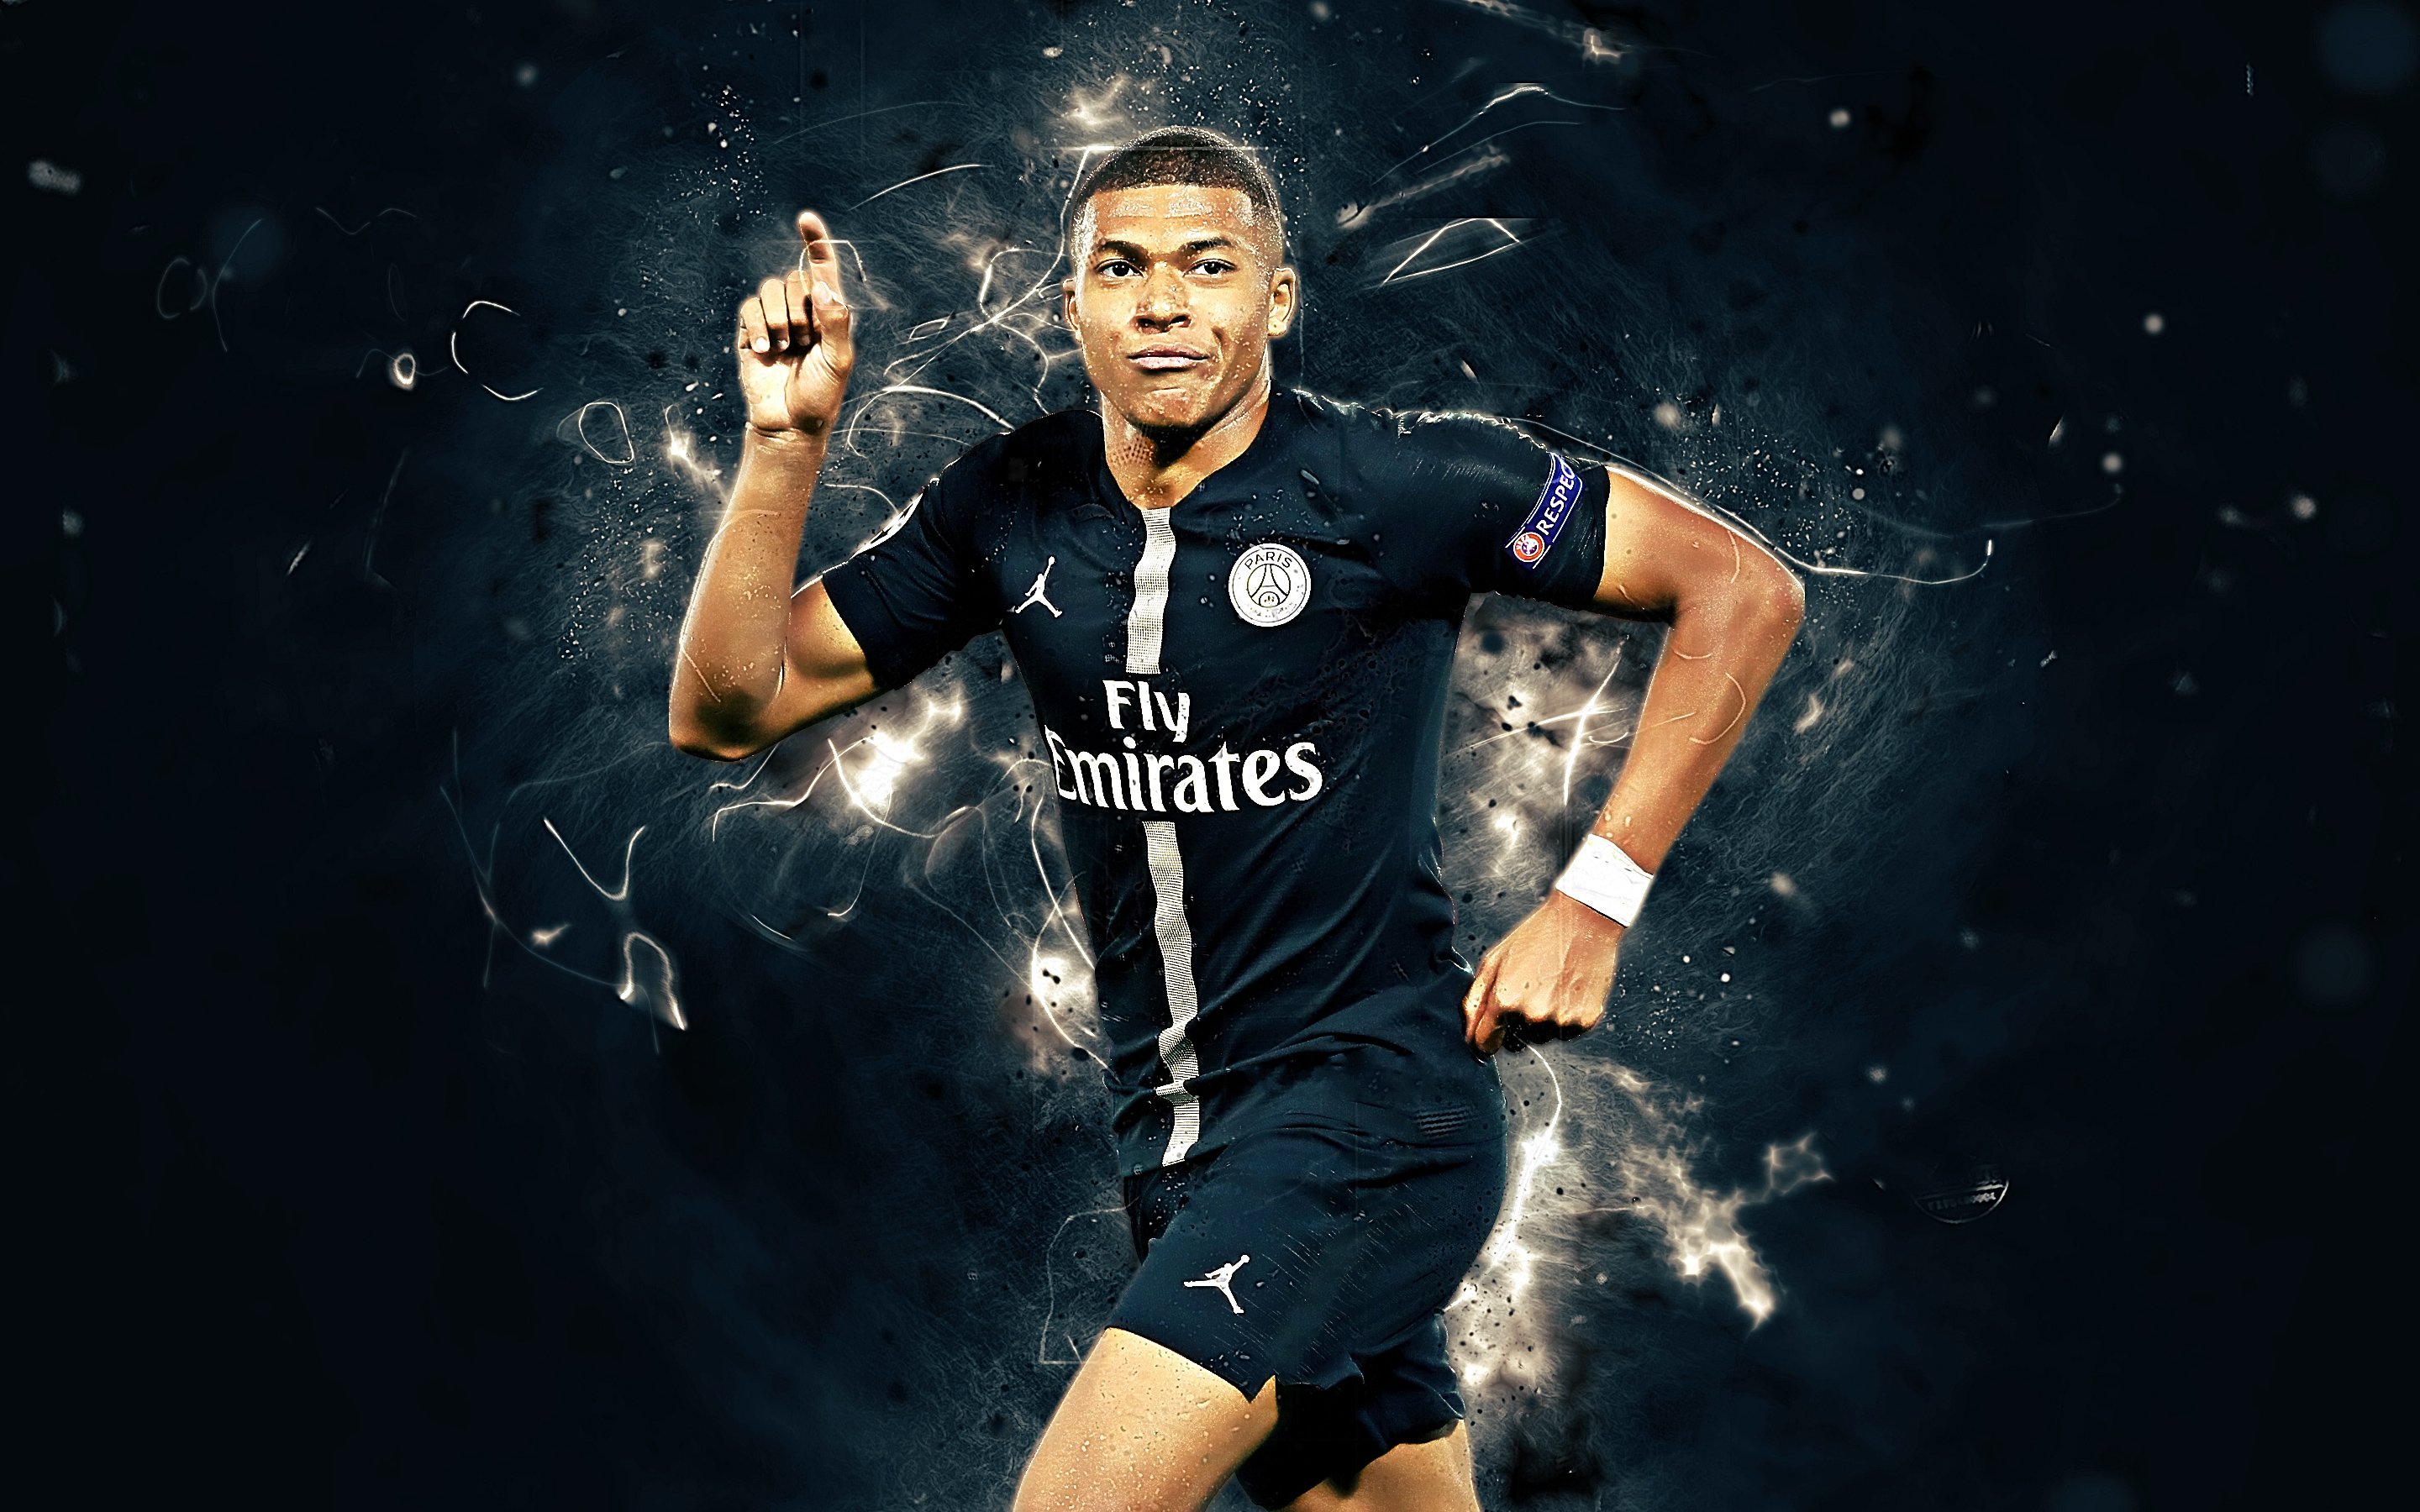 Download Kylian Mbappé wallpapers for mobile phone, free Kylian Mbappé HD pictures